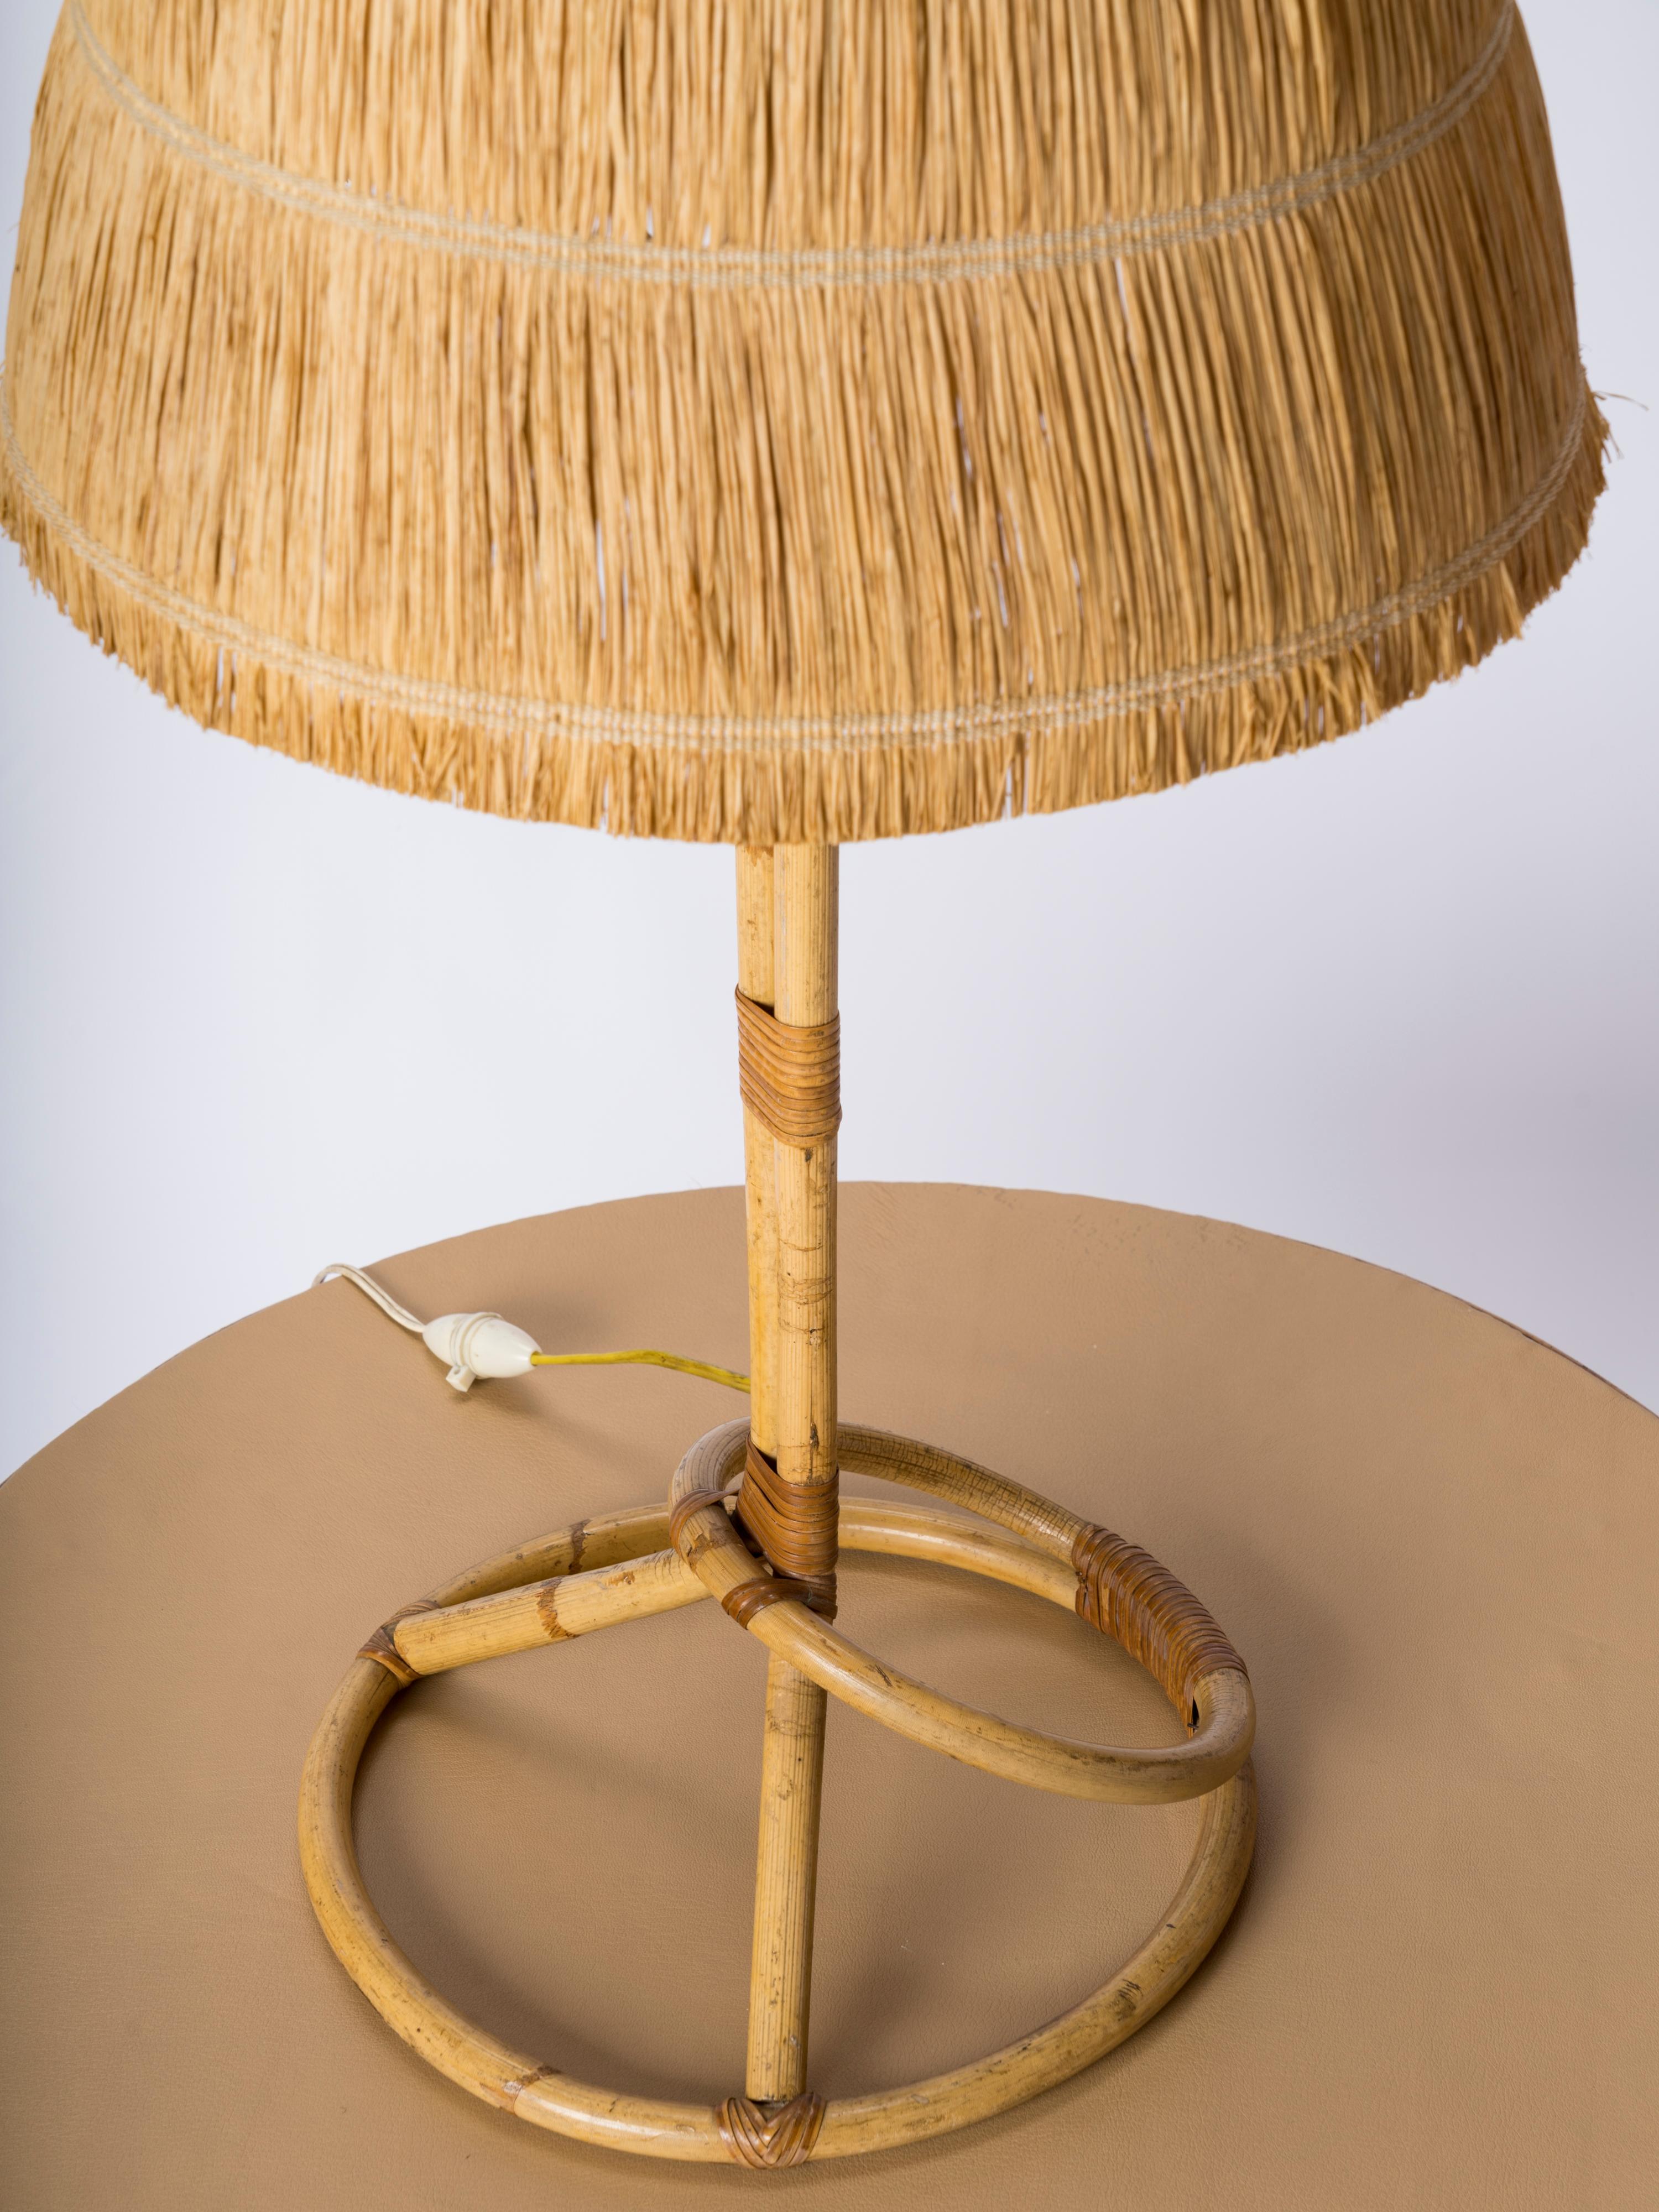 Rare big size table rattan lamp with original raffia shade. France 1950's. In the style of Louis Sognot. Good vintage condition. Needs to be rewired for use in the US.  
Height ex shade is 49cm or 19.3